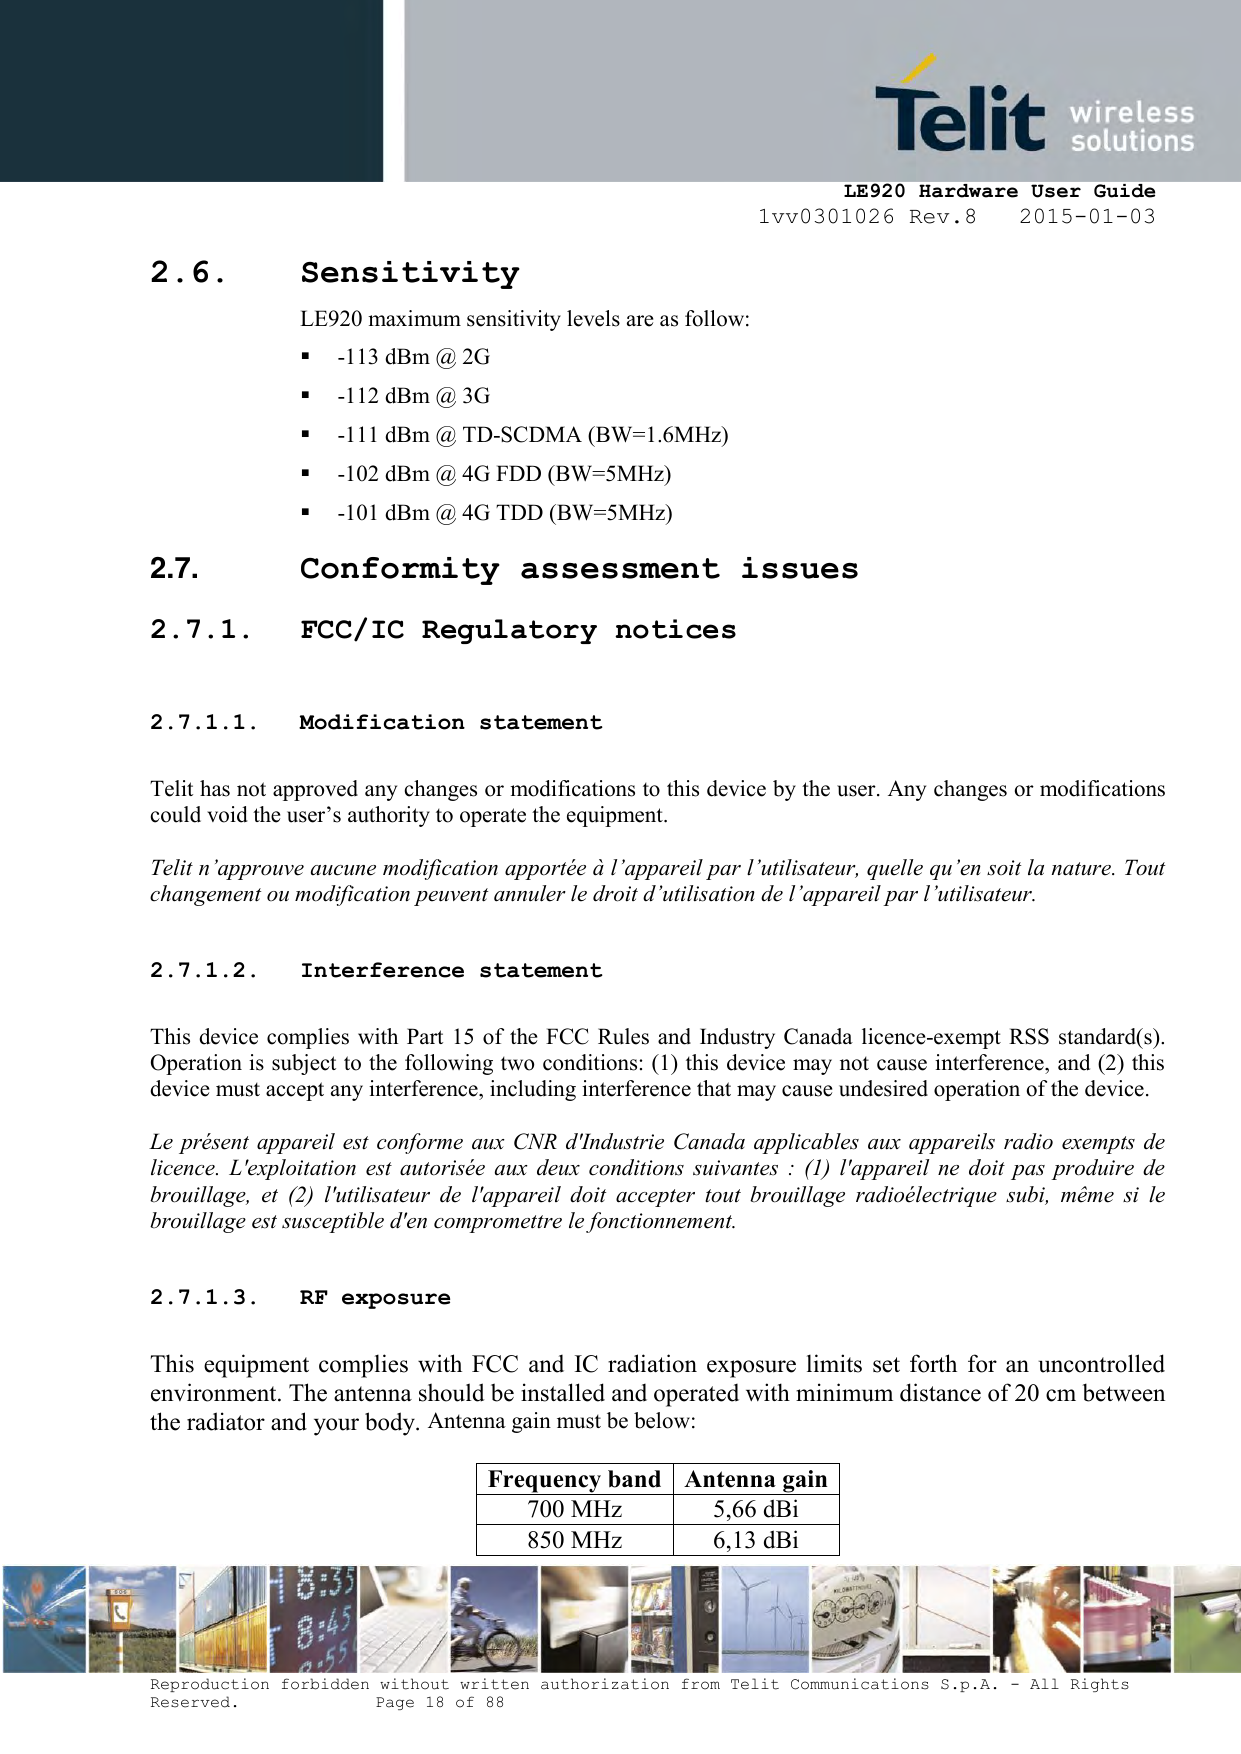     LE920 Hardware User Guide 1vv0301026 Rev.8   2015-01-03 Reproduction forbidden without written authorization from Telit Communications S.p.A. - All Rights Reserved.    Page 18 of 88  2.6. Sensitivity LE920 maximum sensitivity levels are as follow:   -113 dBm @ 2G  -112 dBm @ 3G  -111 dBm @ TD-SCDMA (BW=1.6MHz)  -102 dBm @ 4G FDD (BW=5MHz)  -101 dBm @ 4G TDD (BW=5MHz) 2.7.  Conformity assessment issues 2.7.1. FCC/IC Regulatory notices  2.7.1.1. Modification statement  Telit has not approved any changes or modifications to this device by the user. Any changes or modifications could void the user’s authority to operate the equipment.  Telit n’approuve aucune modification apportée à l’appareil par l’utilisateur, quelle qu’en soit la nature. Tout changement ou modification peuvent annuler le droit d’utilisation de l’appareil par l’utilisateur.  2.7.1.2. Interference statement  This device complies with Part 15 of the FCC  Rules and  Industry Canada licence-exempt RSS standard(s). Operation is subject to the following two conditions: (1) this device may not cause interference, and (2) this device must accept any interference, including interference that may cause undesired operation of the device.  Le présent appareil est  conforme  aux CNR d&apos;Industrie  Canada applicables aux  appareils  radio  exempts de licence.  L&apos;exploitation  est  autorisée  aux  deux  conditions  suivantes  :  (1)  l&apos;appareil  ne  doit  pas  produire  de brouillage,  et  (2)  l&apos;utilisateur  de  l&apos;appareil  doit  accepter  tout  brouillage  radioélectrique  subi,  même  si  le brouillage est susceptible d&apos;en compromettre le fonctionnement.  2.7.1.3. RF exposure  This  equipment  complies  with  FCC  and  IC  radiation  exposure limits  set  forth  for  an  uncontrolled environment. The antenna should be installed and operated with minimum distance of 20 cm between the radiator and your body. Antenna gain must be below:  Frequency band Antenna gain 700 MHz 5,66 dBi 850 MHz 6,13 dBi 